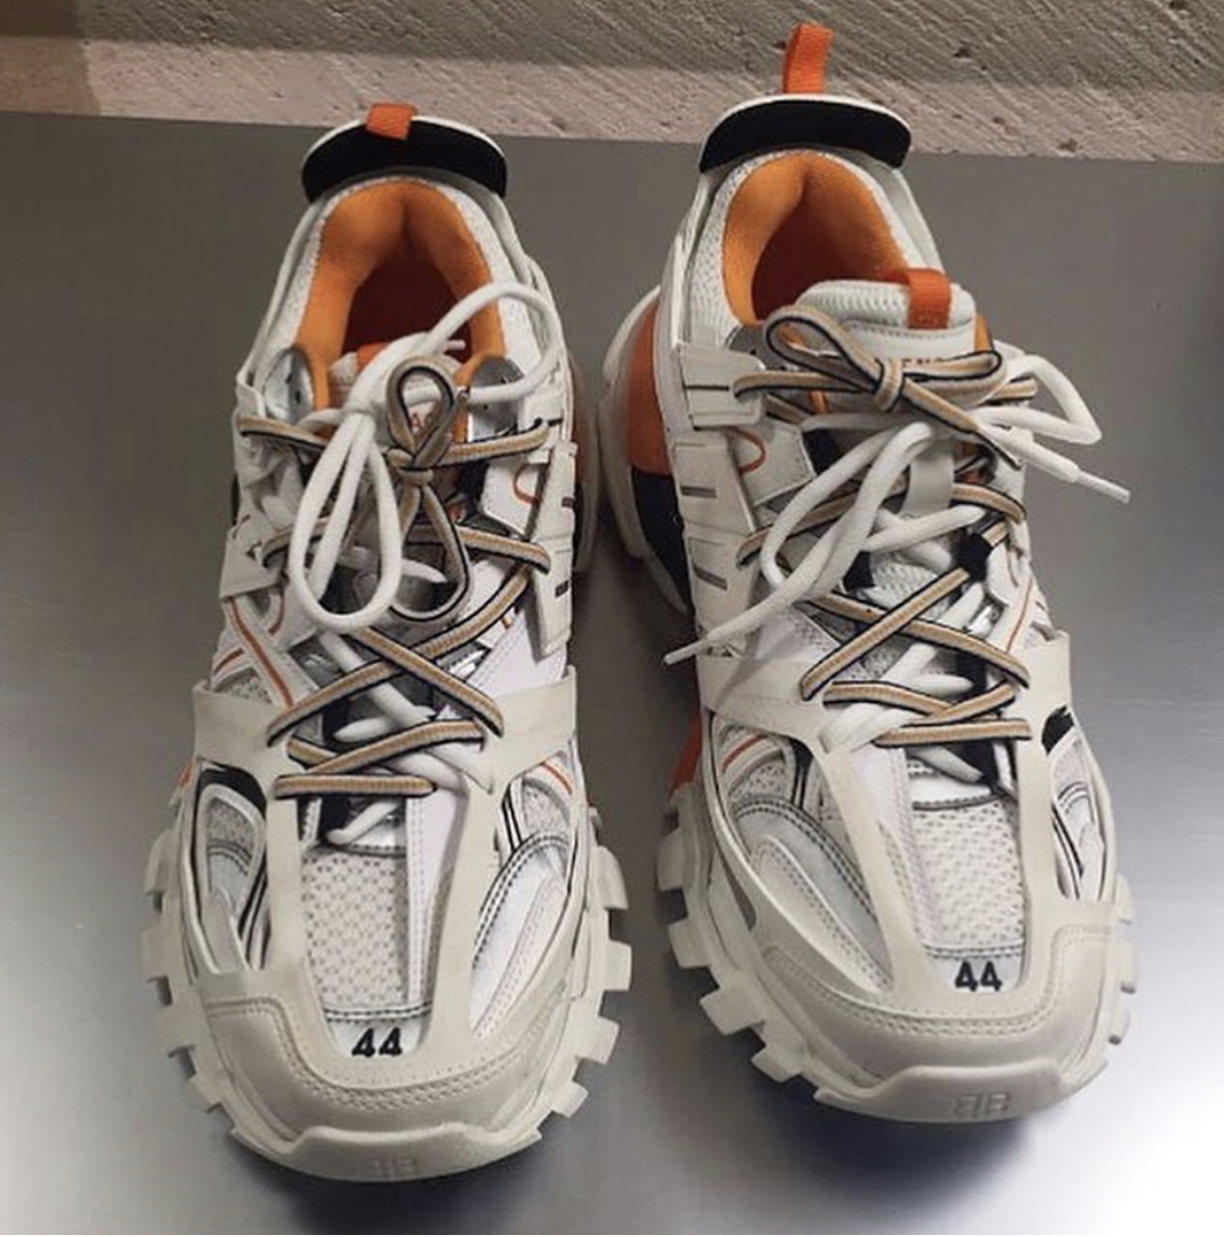 Take A Look At Balenciaga’s New Trekking Inspired Trainer